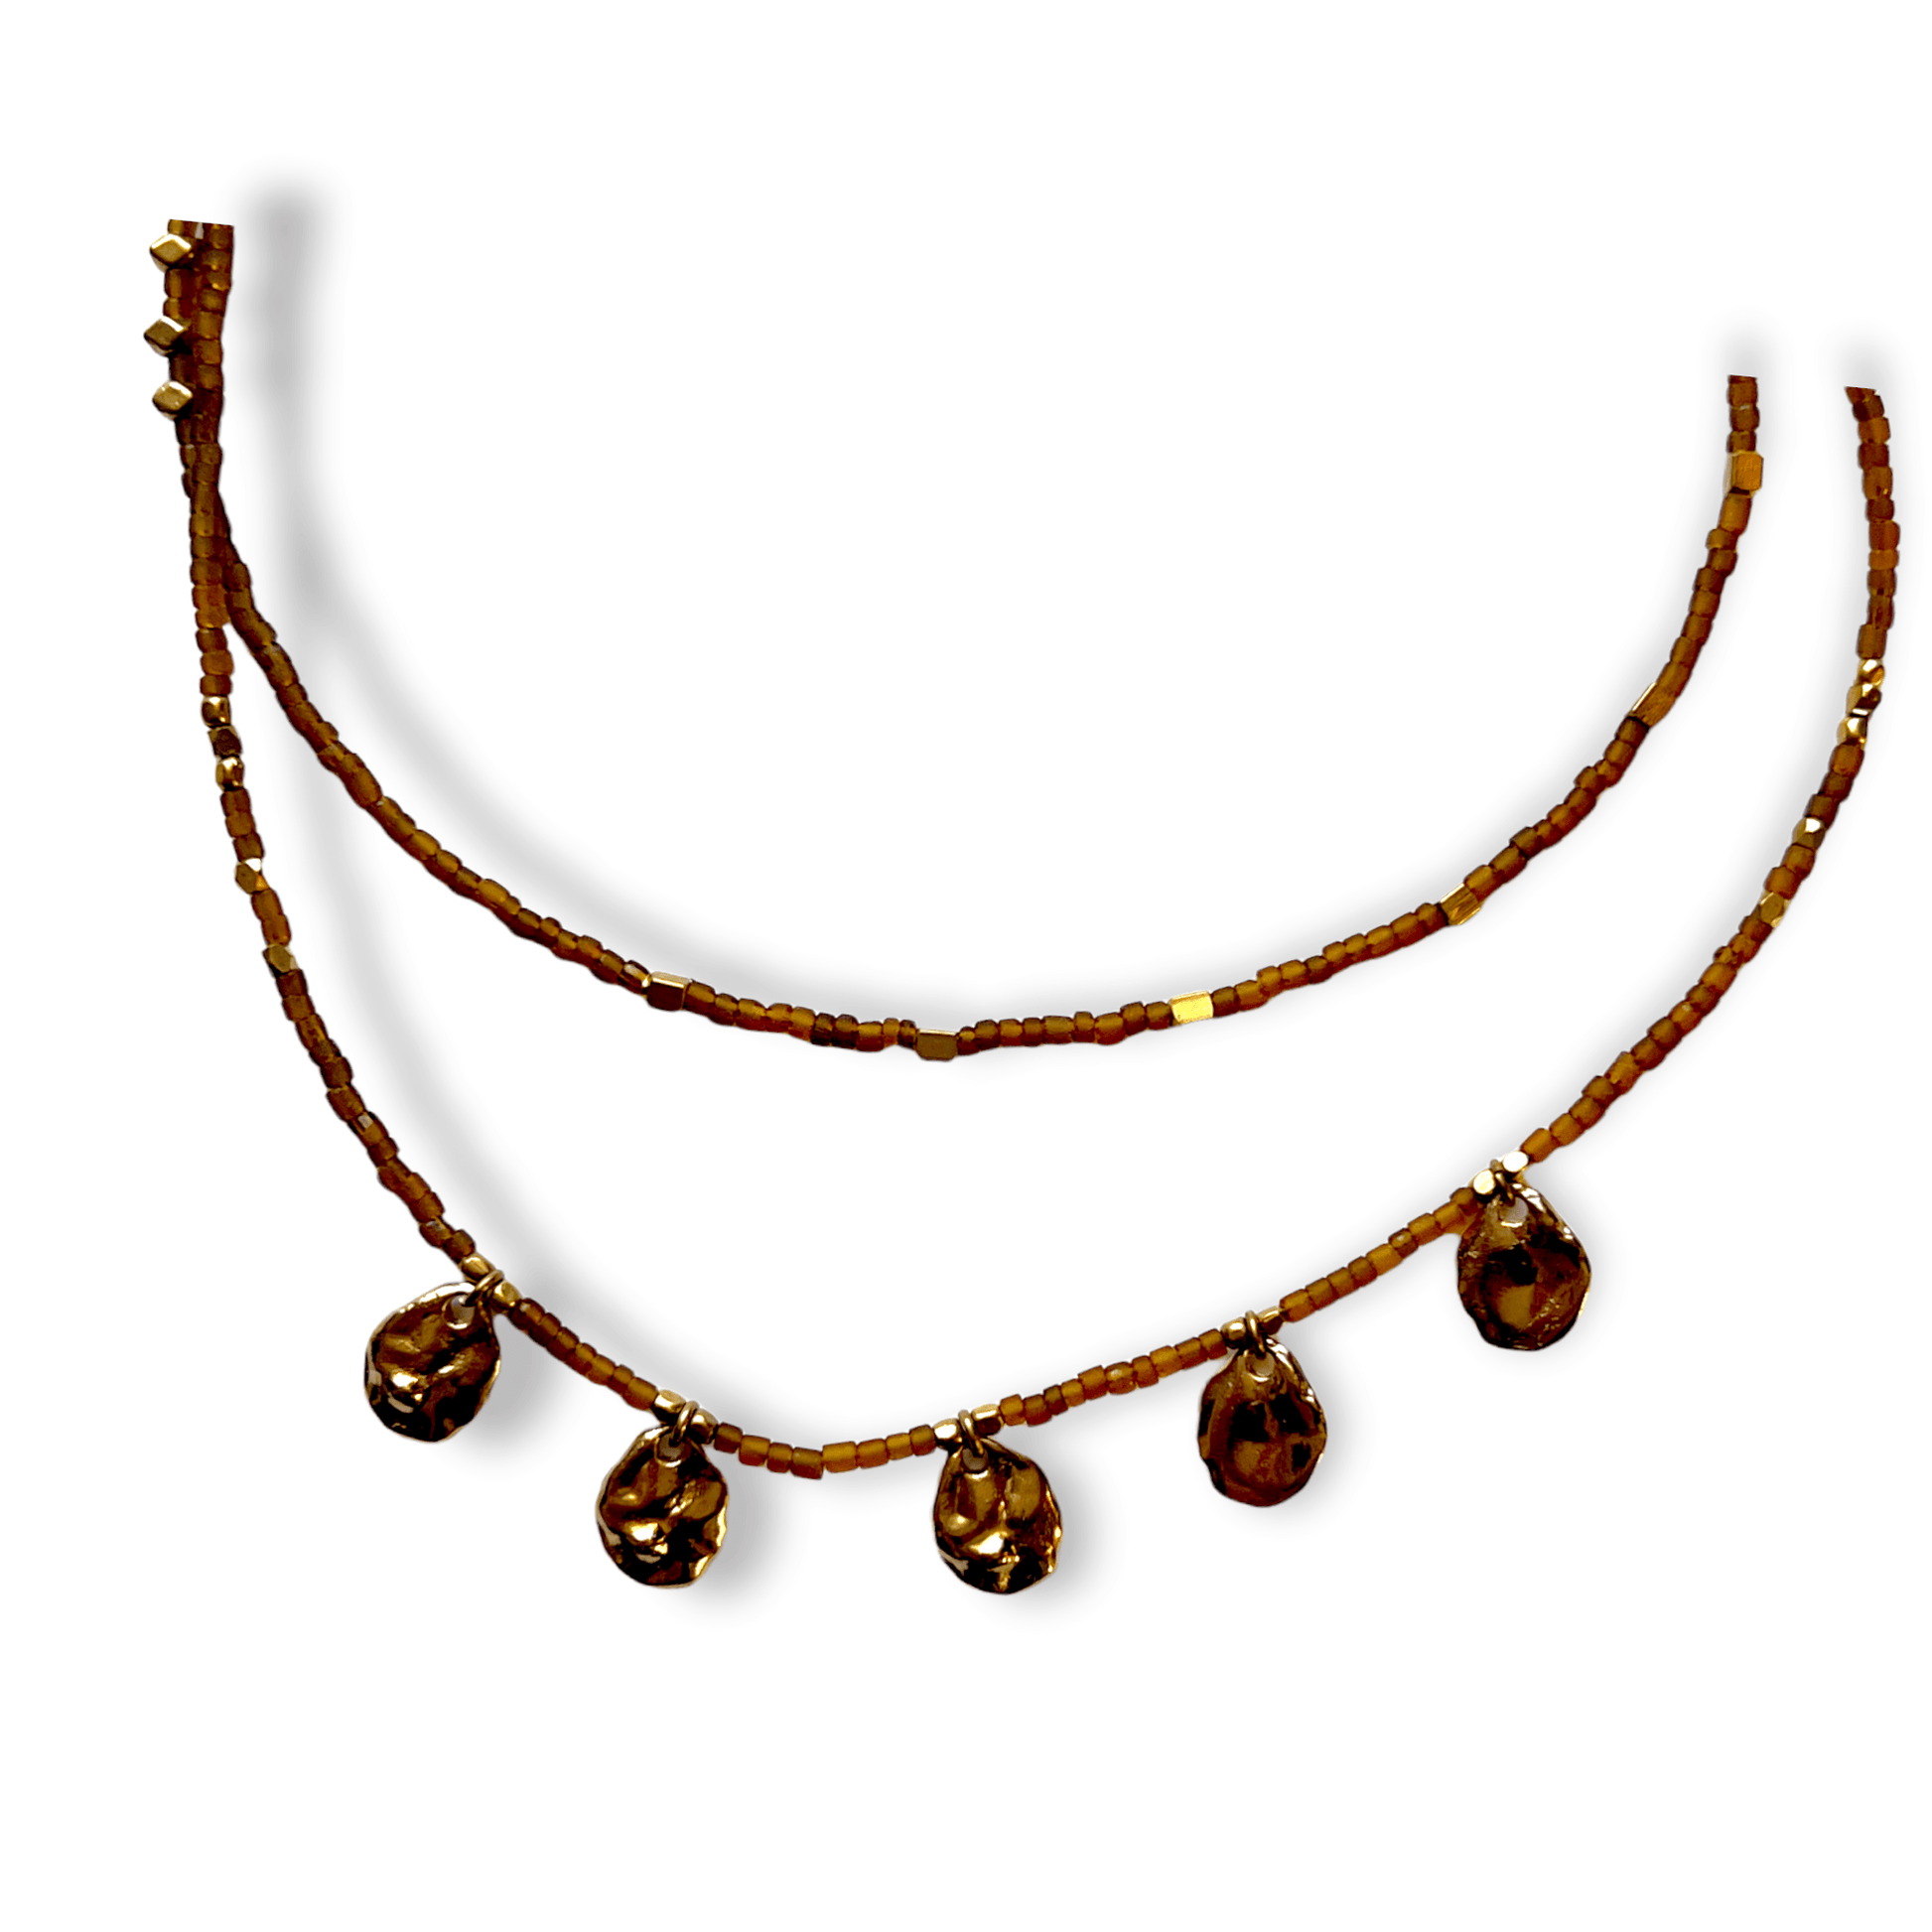 Double strand beaded necklace with brass accentsSundara Joon